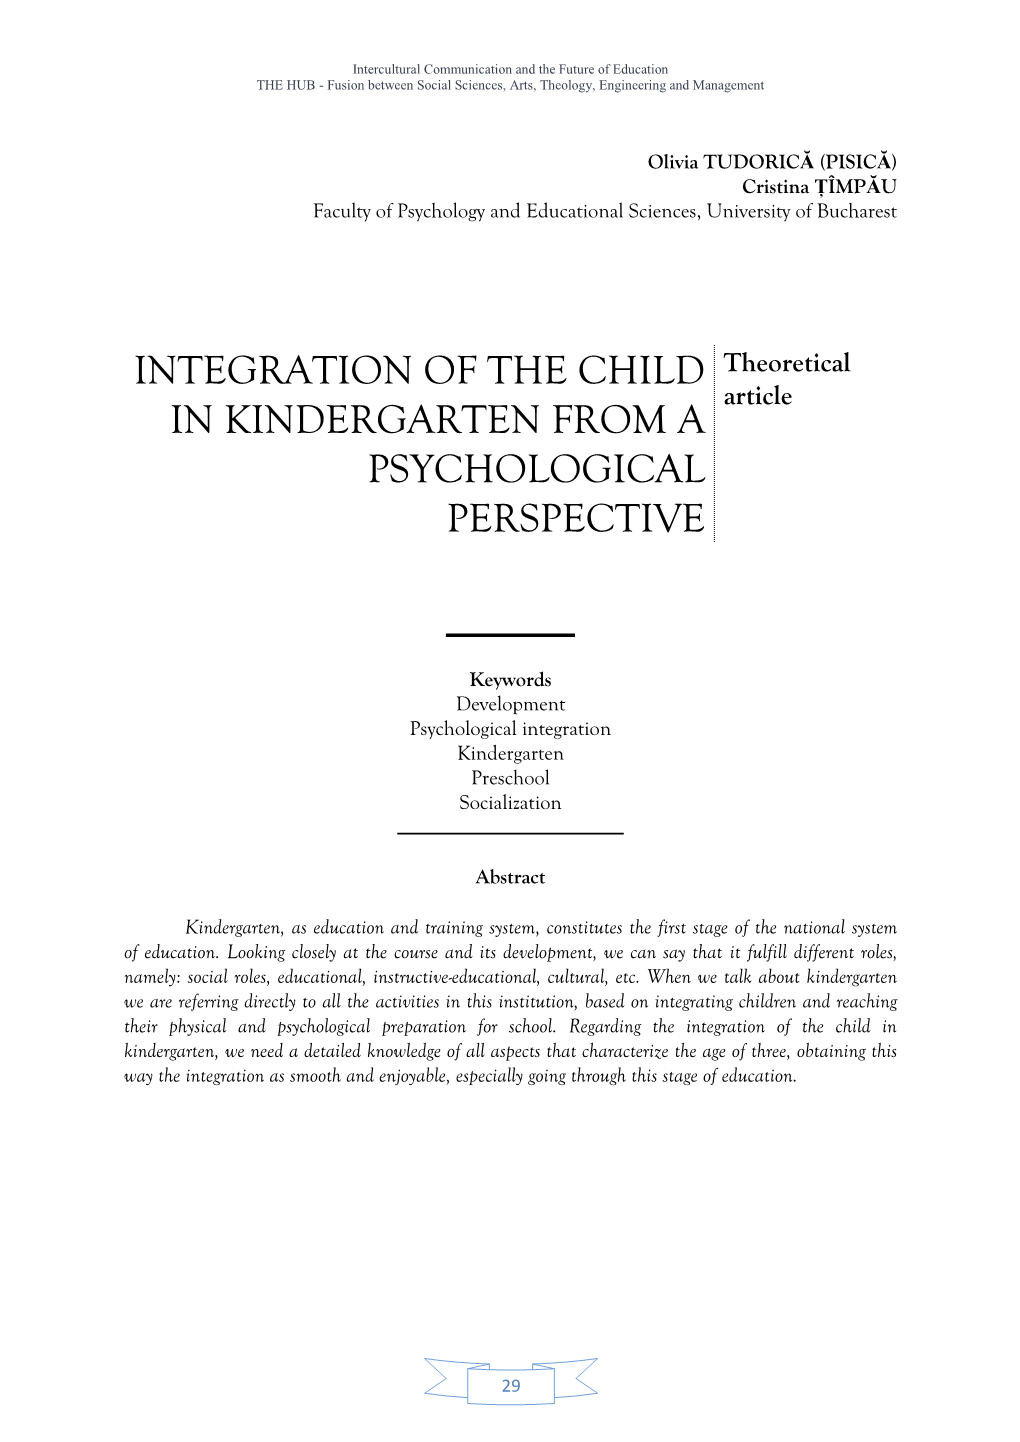 Integration of the Child in Kindergarten from a Psychological